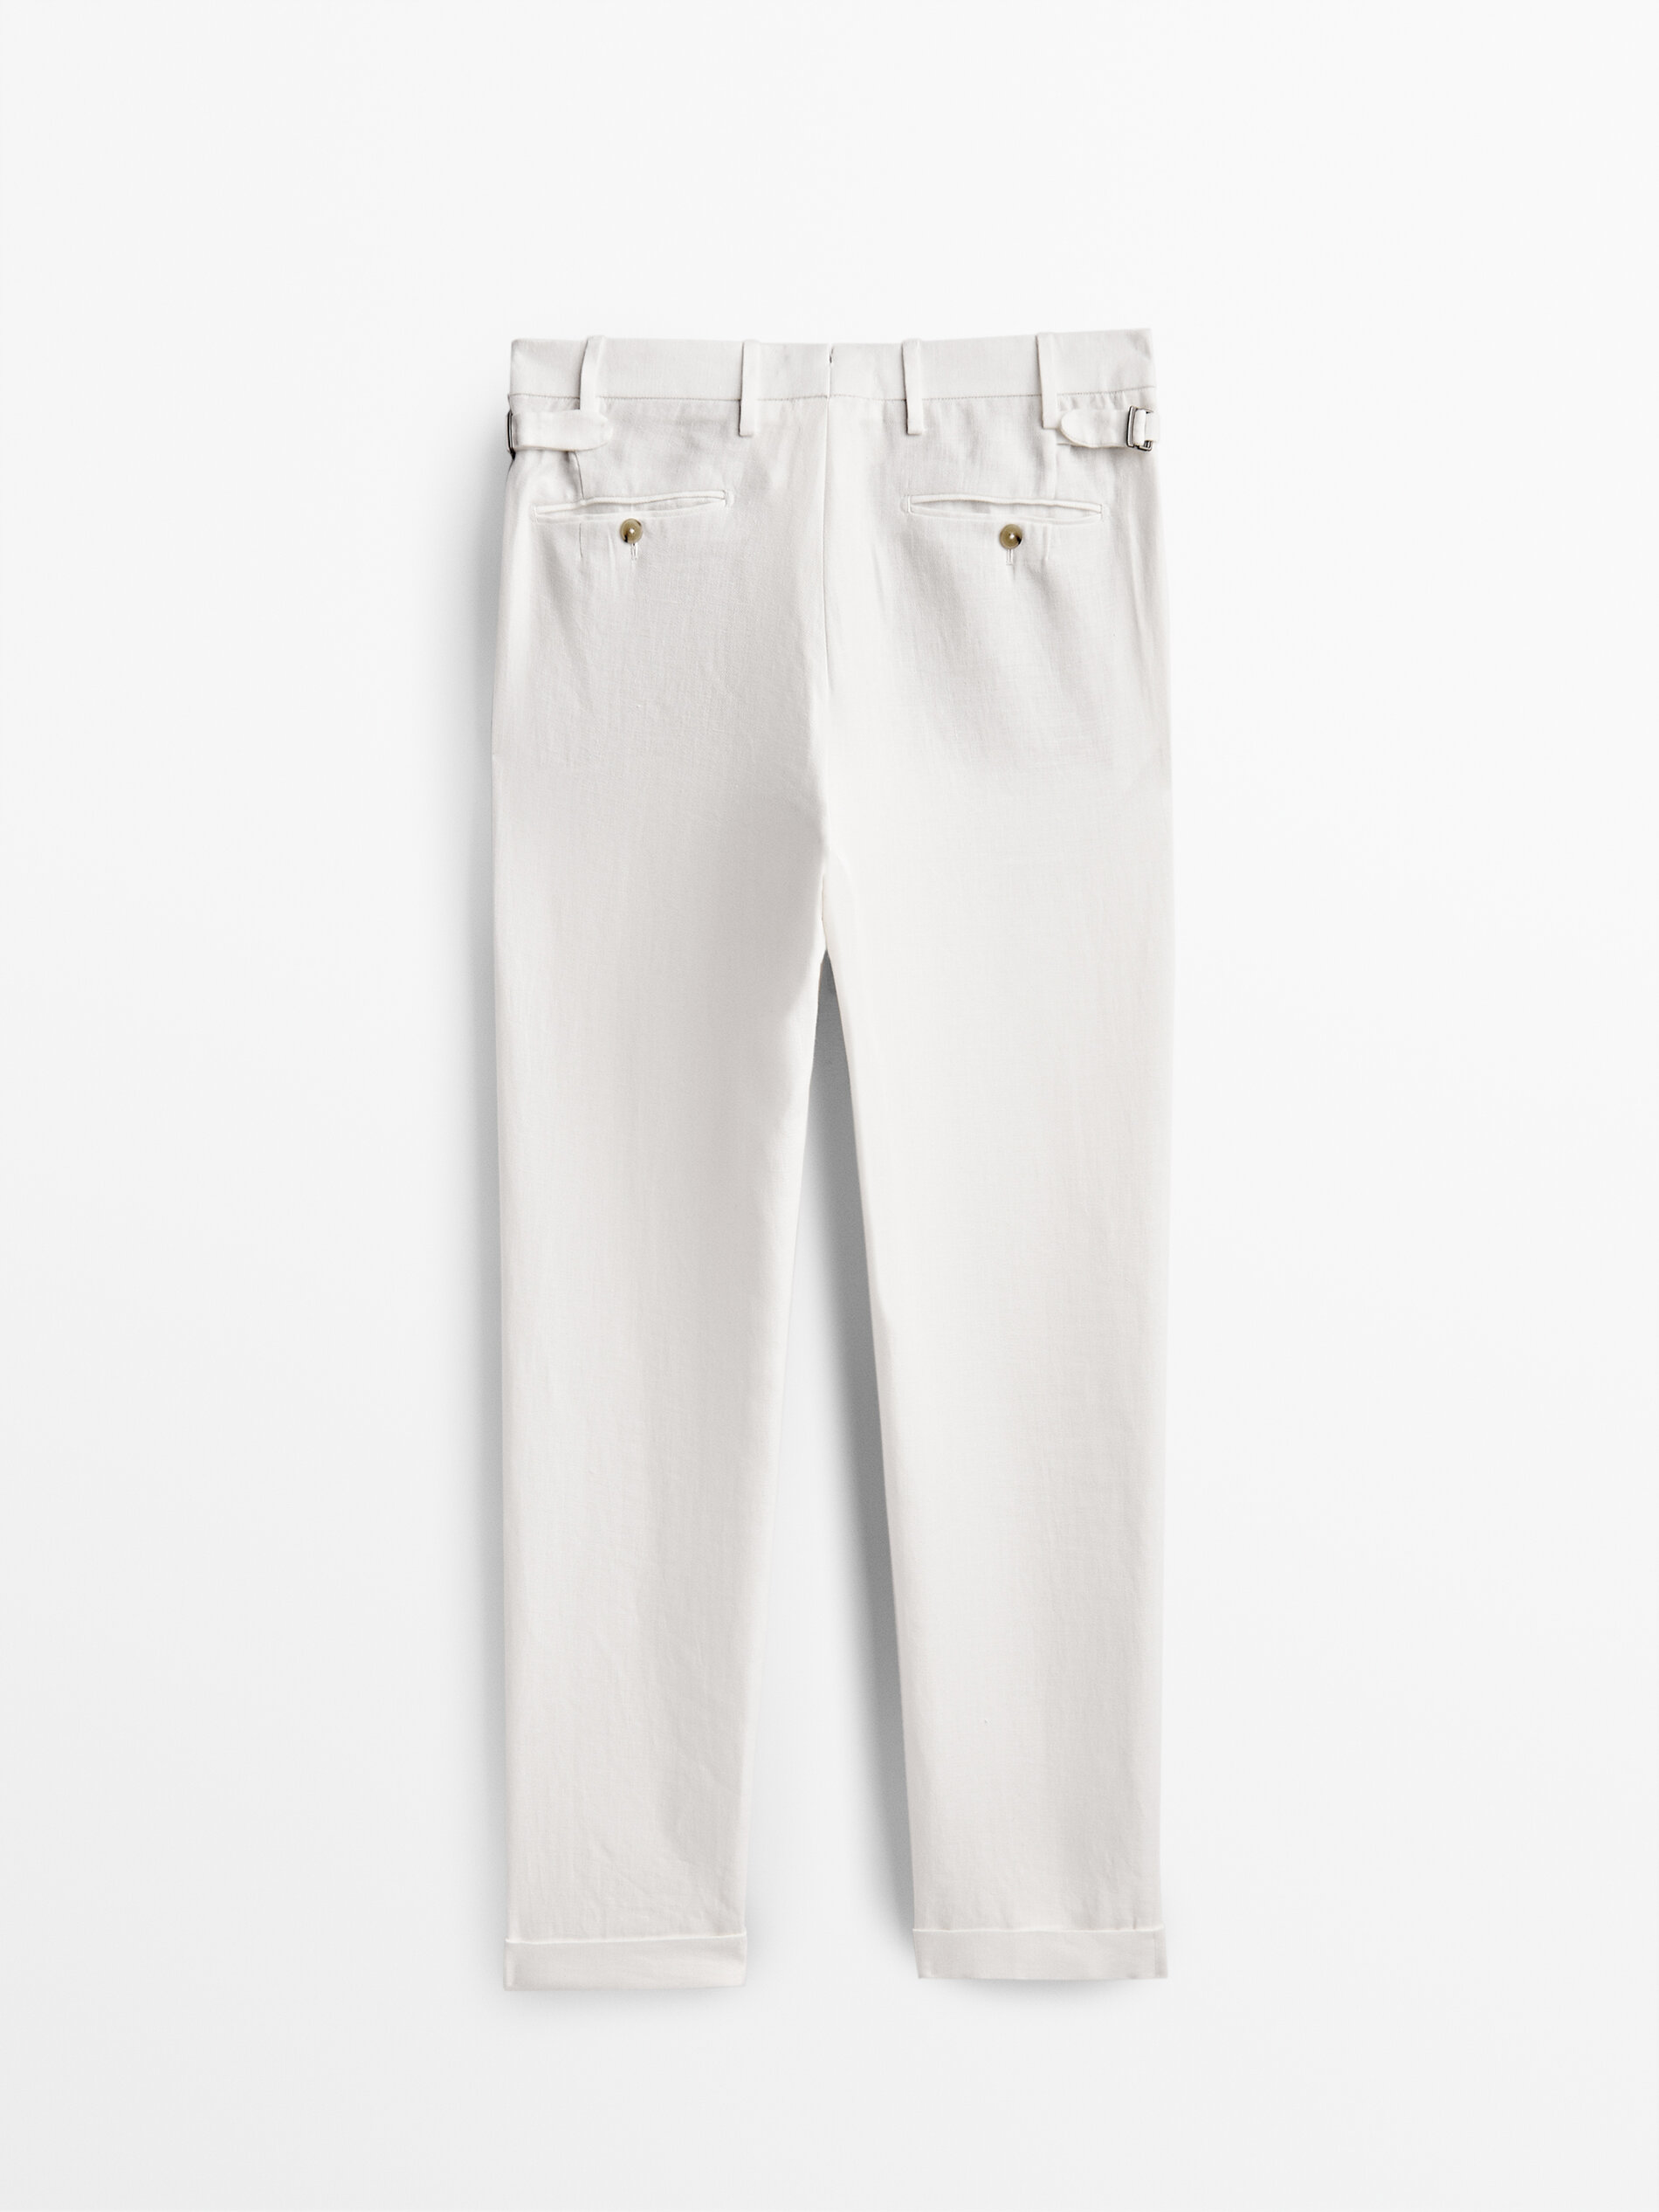 Massimo Dutti White Linen Suit Trousers - Limited Edition - Big Apple Buddy